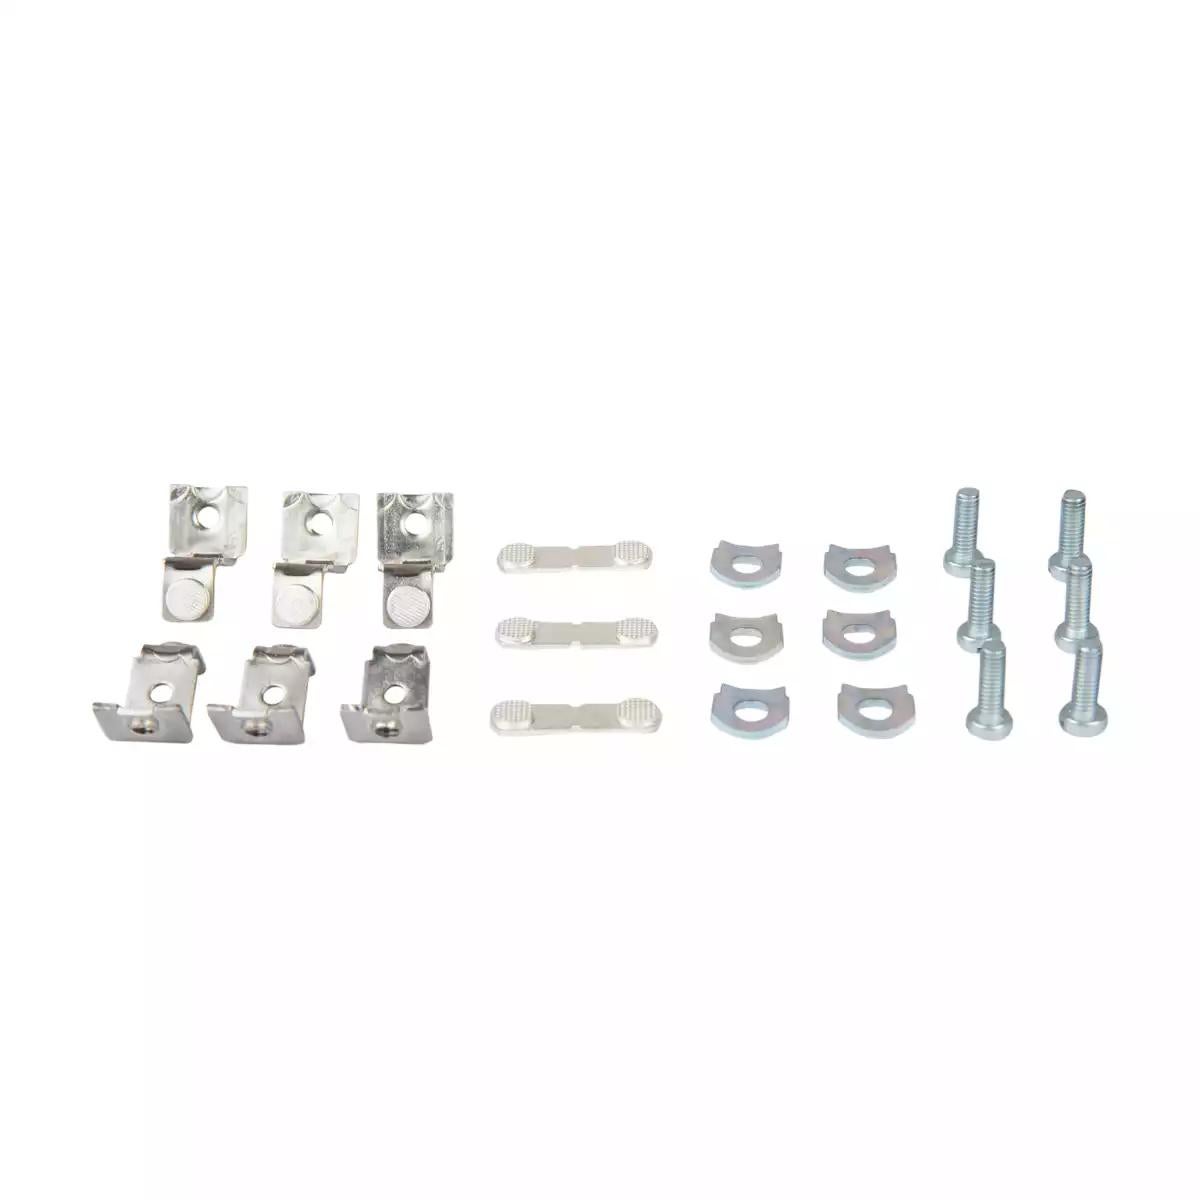 MNX 12 - Spare Contact Kit